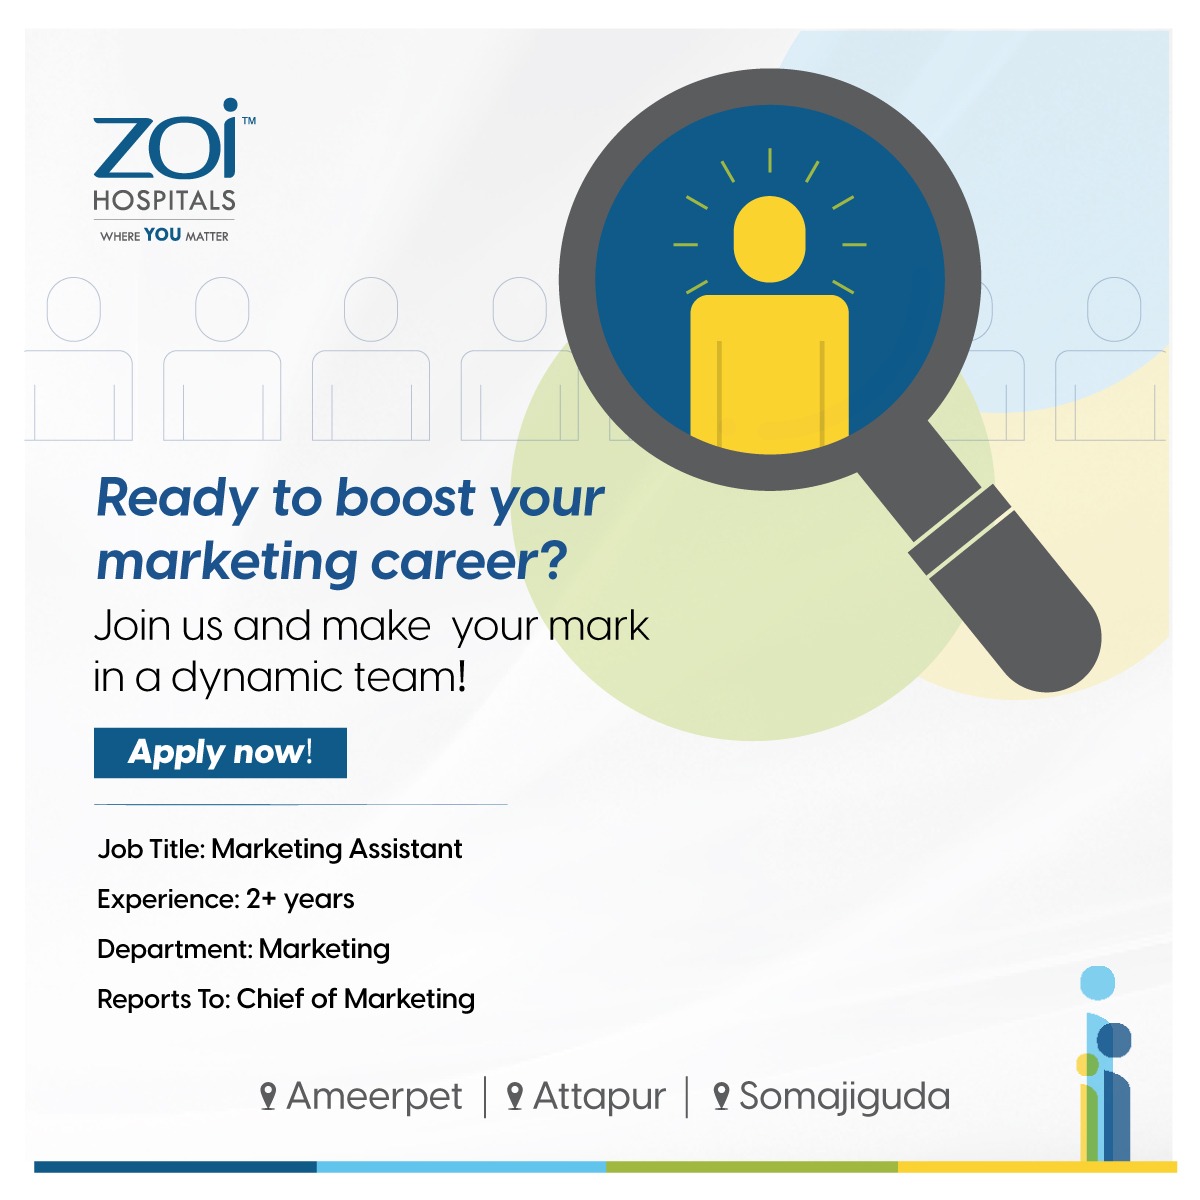 If you’re someone who wants to strive for excellence in a #marketing #career & can make a difference, we want to hear from you. Click the link below to apply. forms.gle/qJpjtTLEzvMhbX… @ZoiHospitals #joinourteam #hiringnow #ameerpet #attapur #somajiguda #marketingassistant